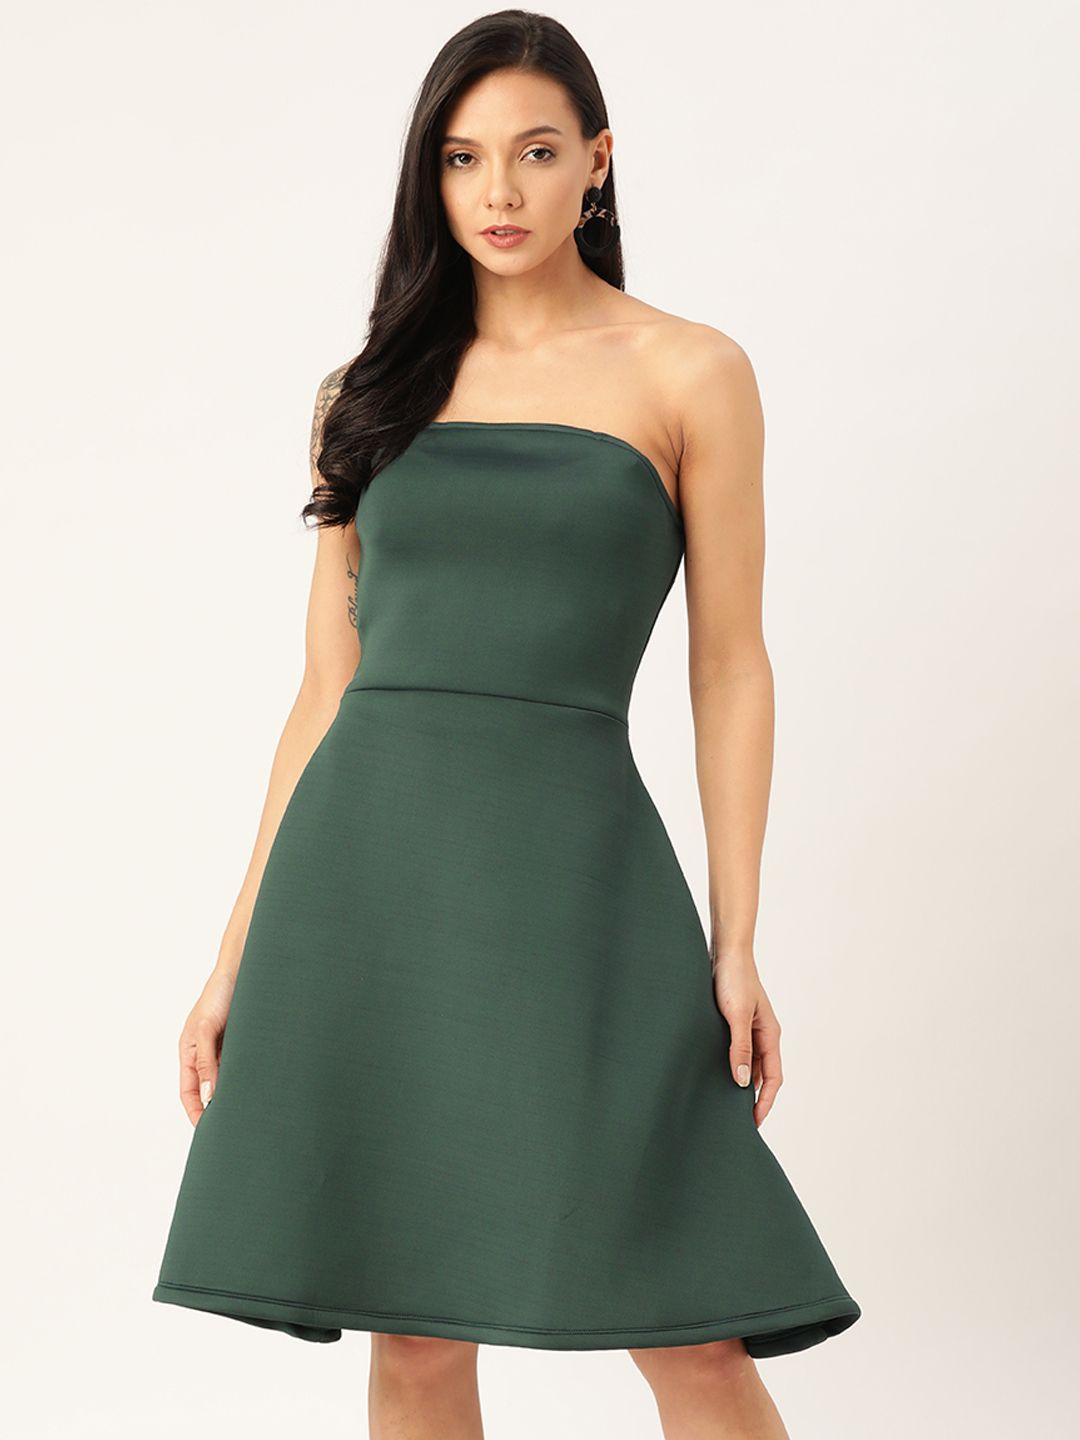 dodo & moa women teal green solid off-shoulder fit and flare dress